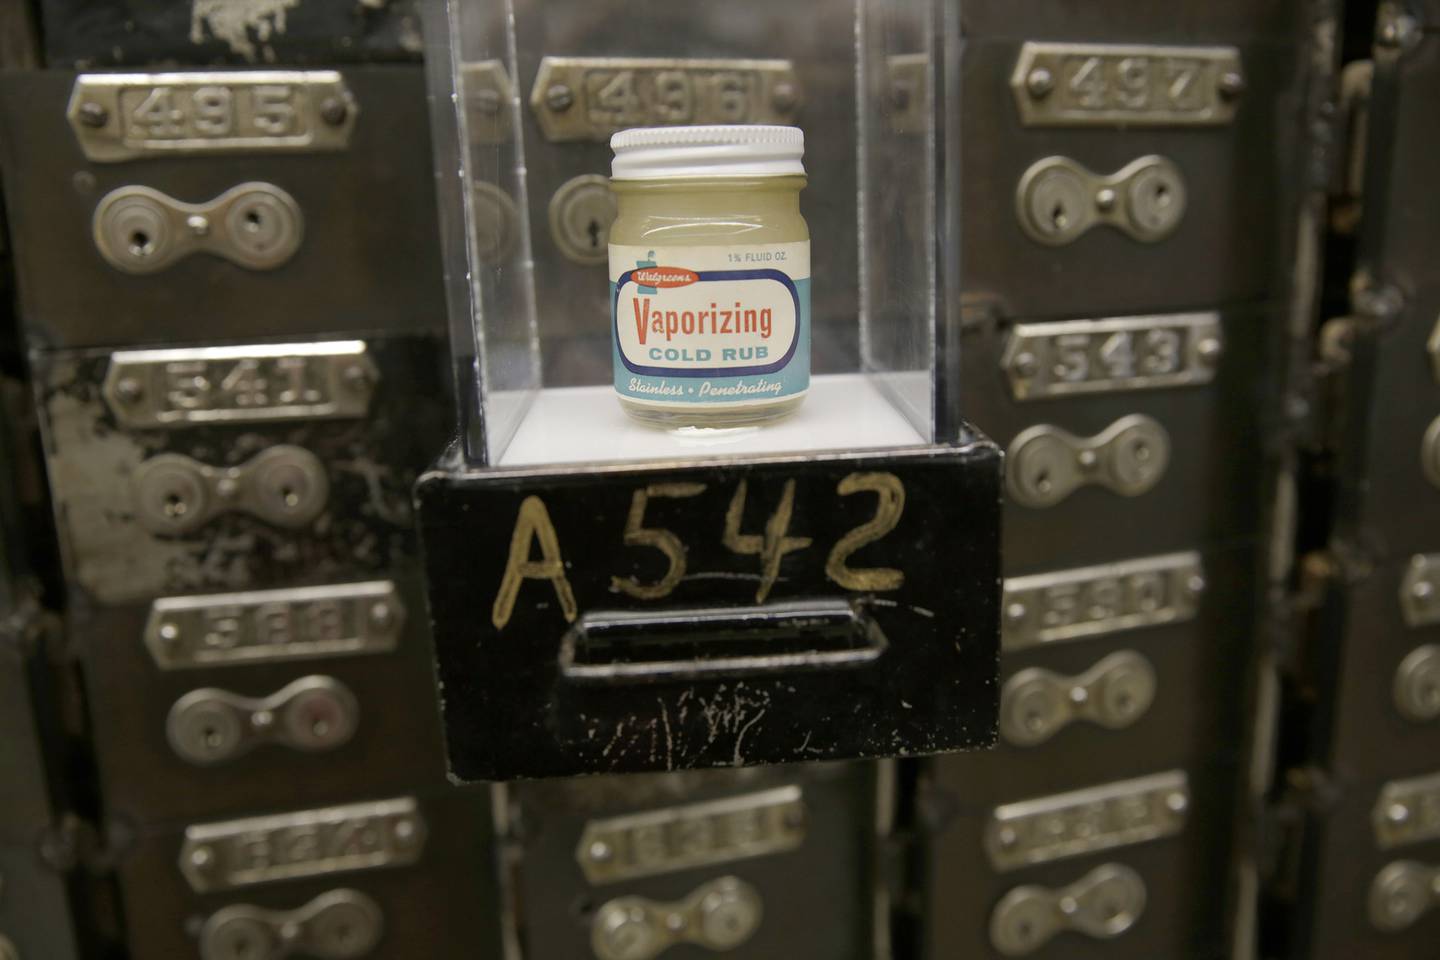 Vintage products on display in the bank vault turned Vitamin Vault in 2014.